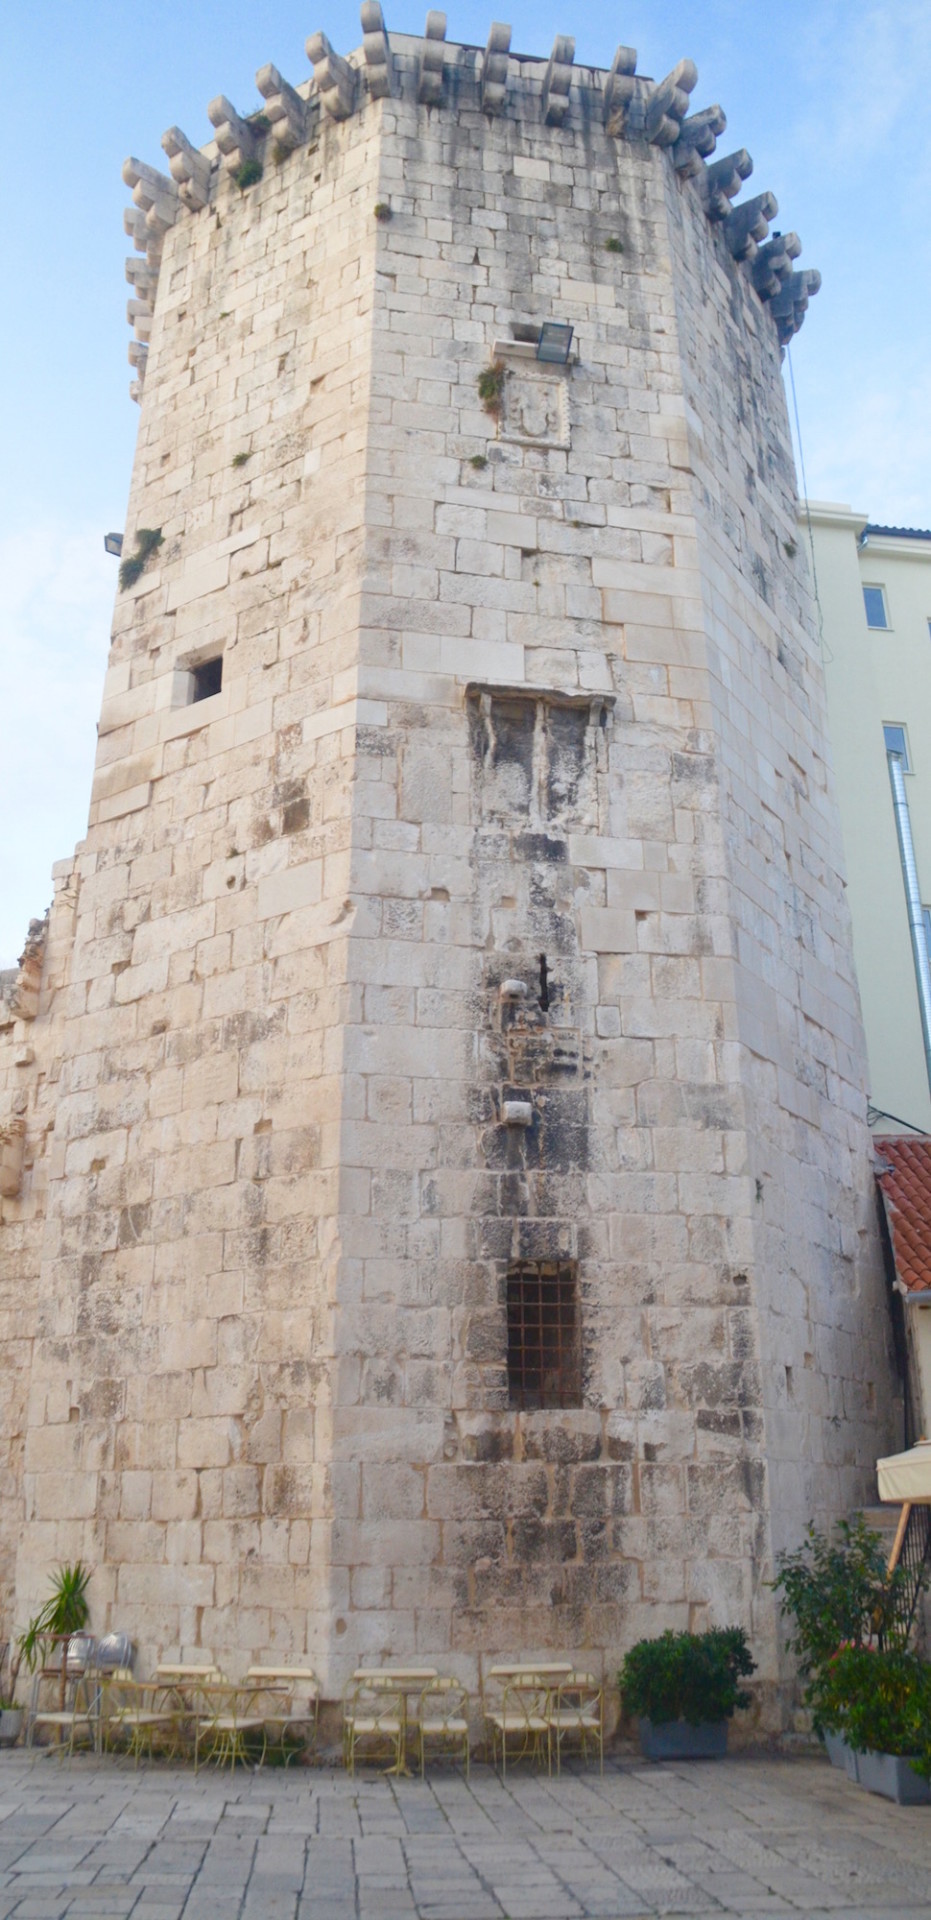 Original Tower of Diocletian's Palace